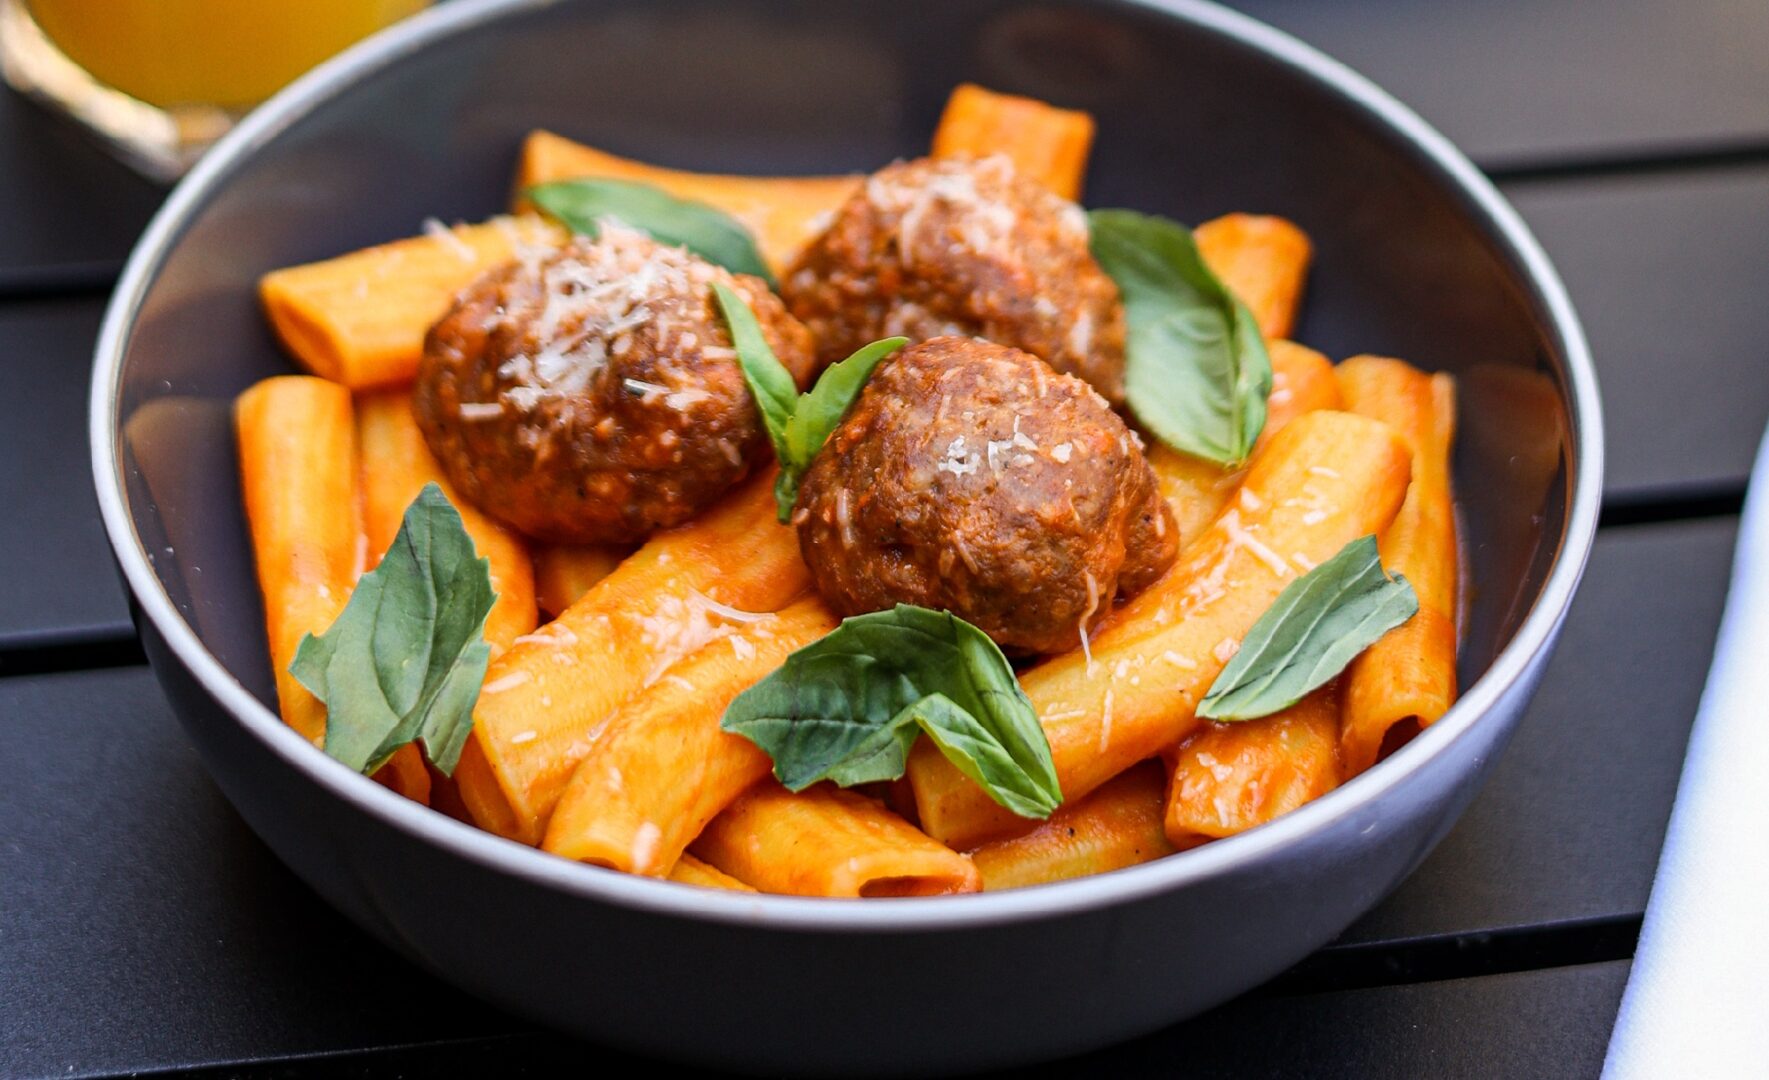 Kids Meatballs and Pasta at Bread street Kitchen and Bar 